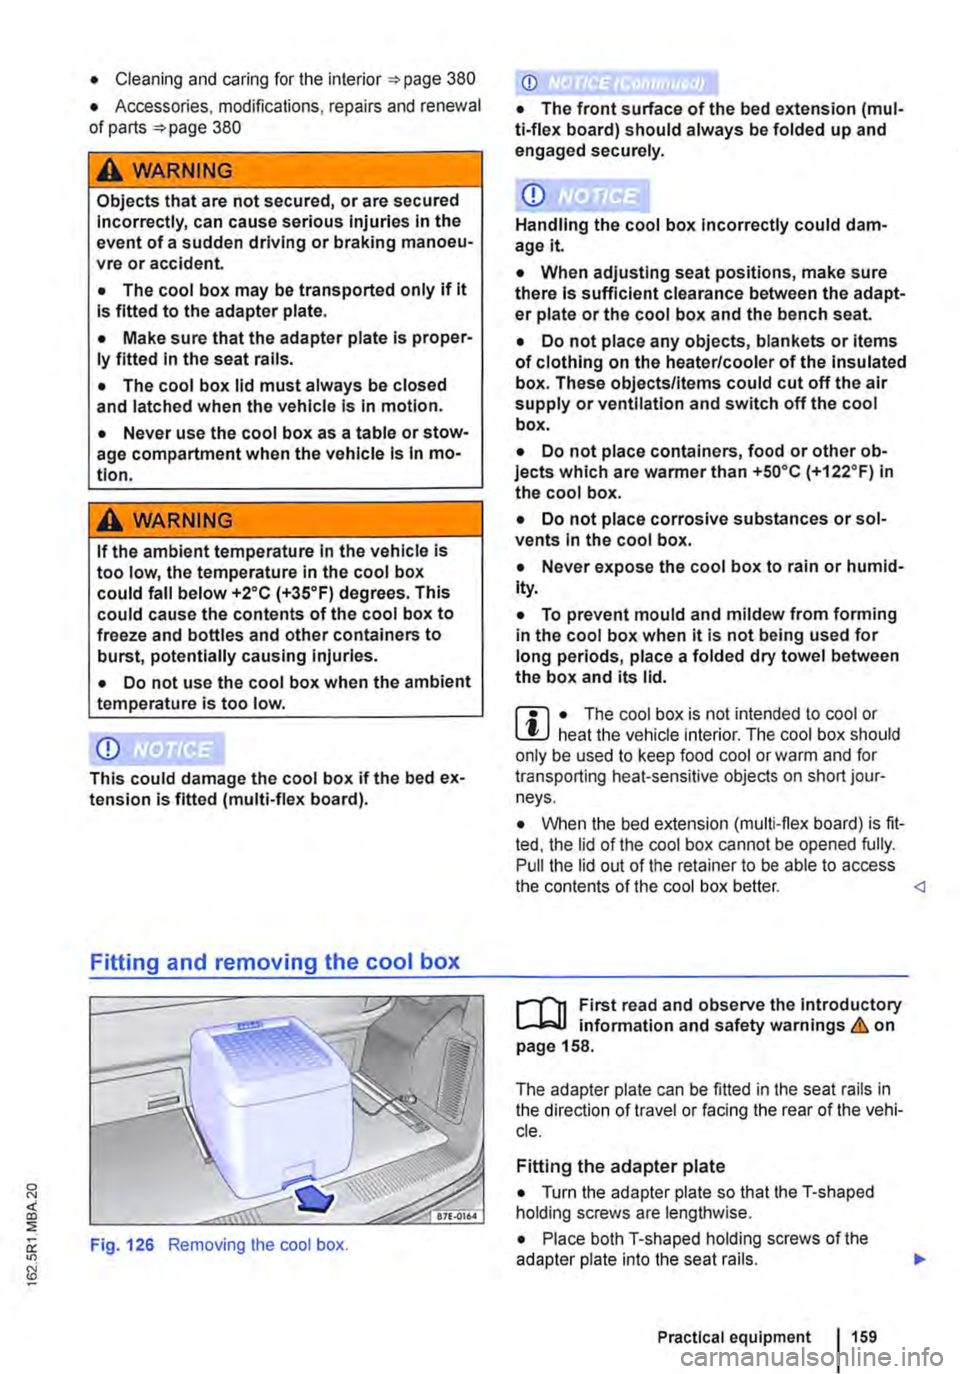 VOLKSWAGEN TRANSPORTER 2013  Owners Manual • Cleaning and caring for the interior =:>page 380 
• Accessories. modifications, repairs and renewal of parts =:>page 380 
A WARNING 
Objects that are not secured, or are secured Incorrectly, can